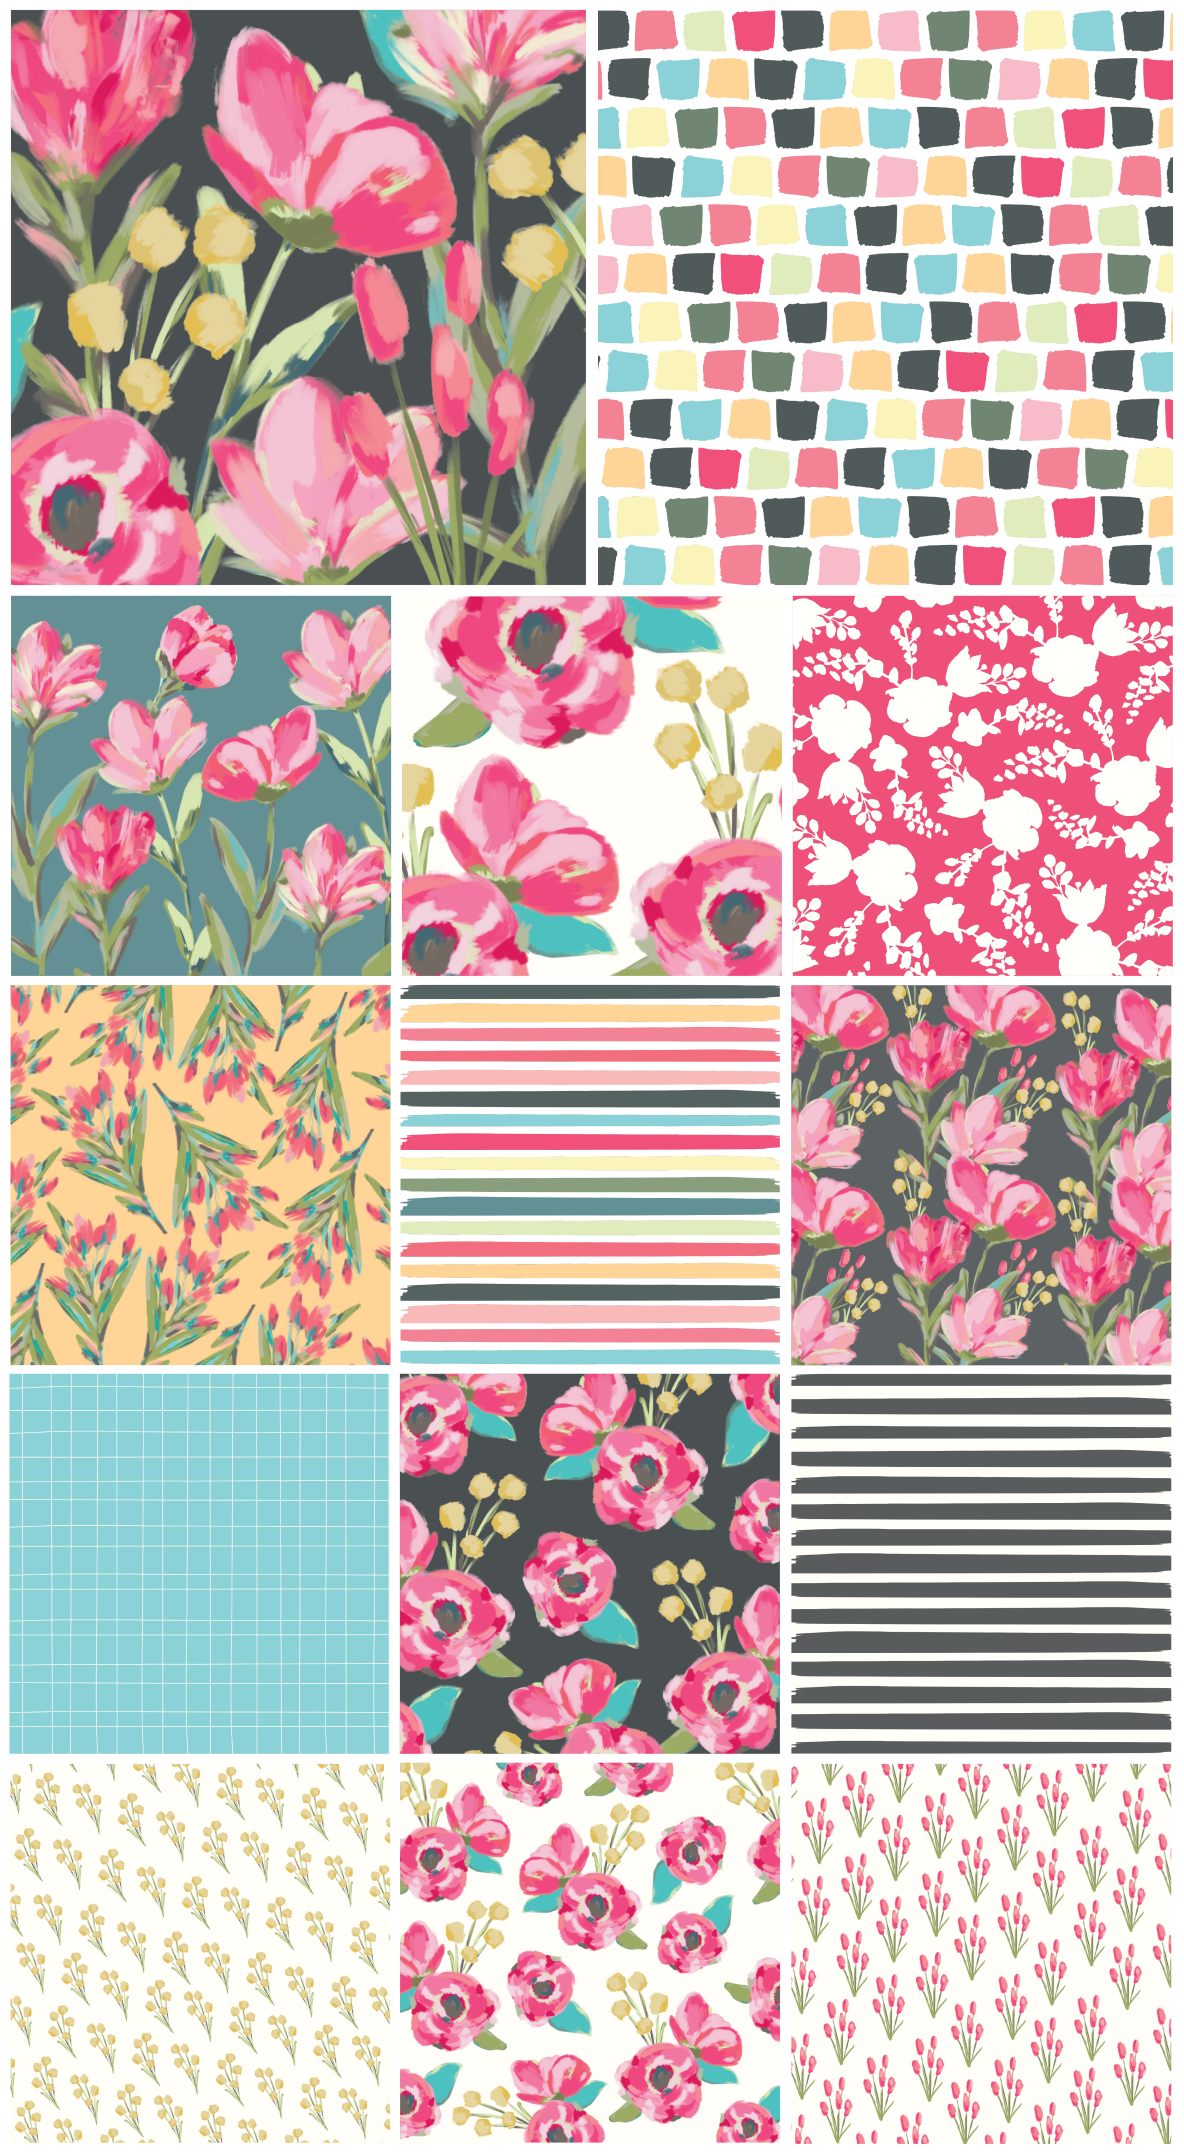 Patterns Textiles ILLUSTRATION  surface design free floral colorful Stationery paper patterns